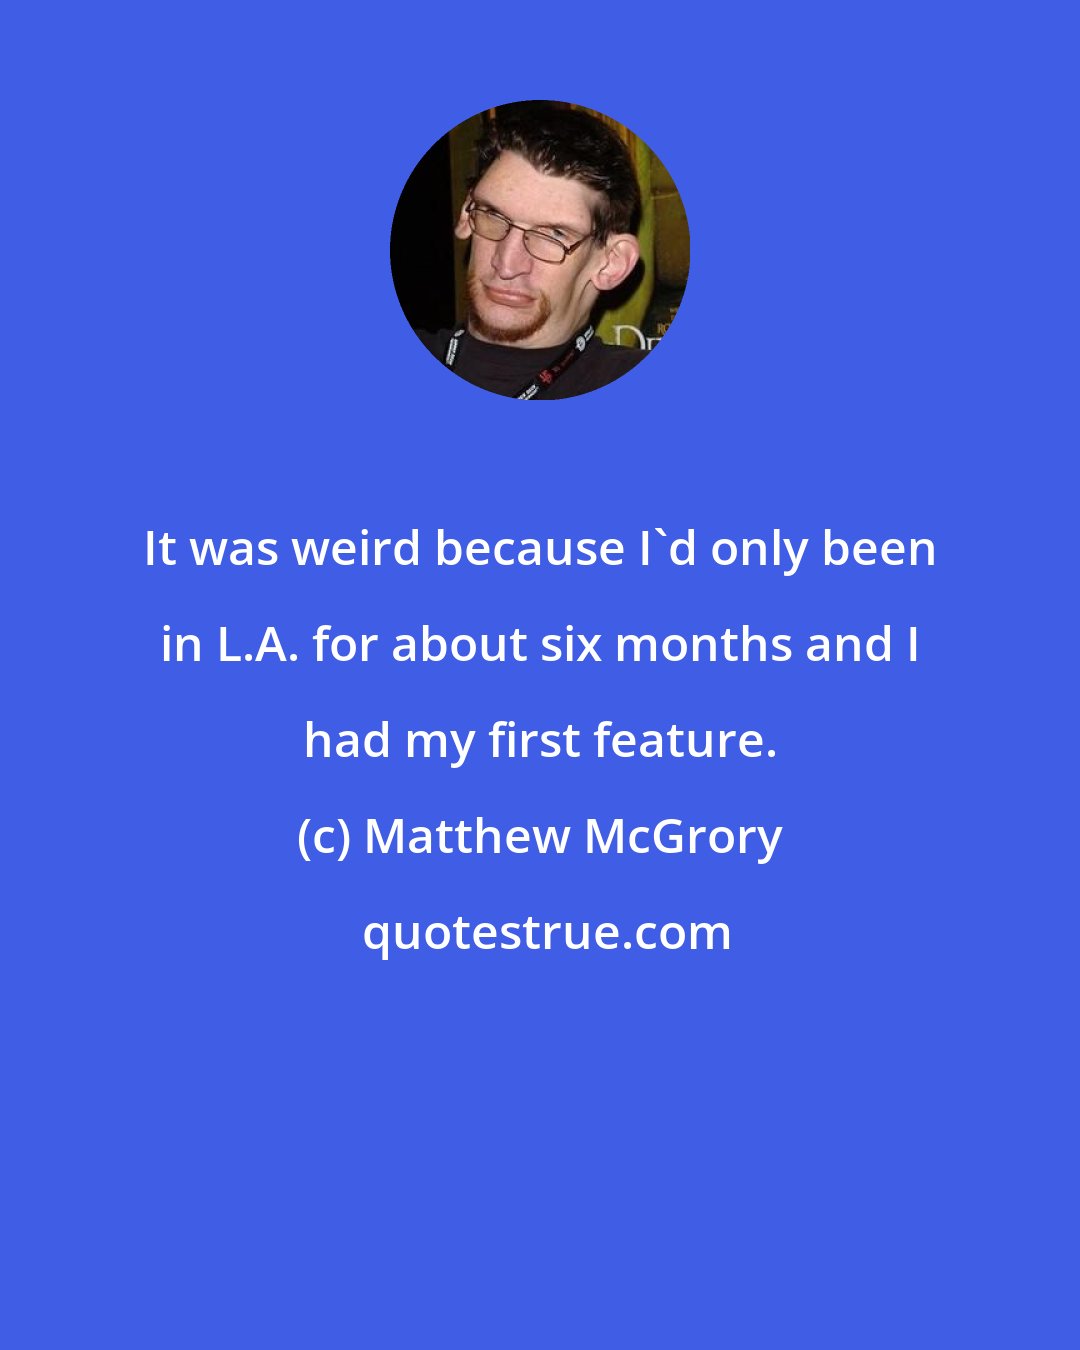 Matthew McGrory: It was weird because I'd only been in L.A. for about six months and I had my first feature.